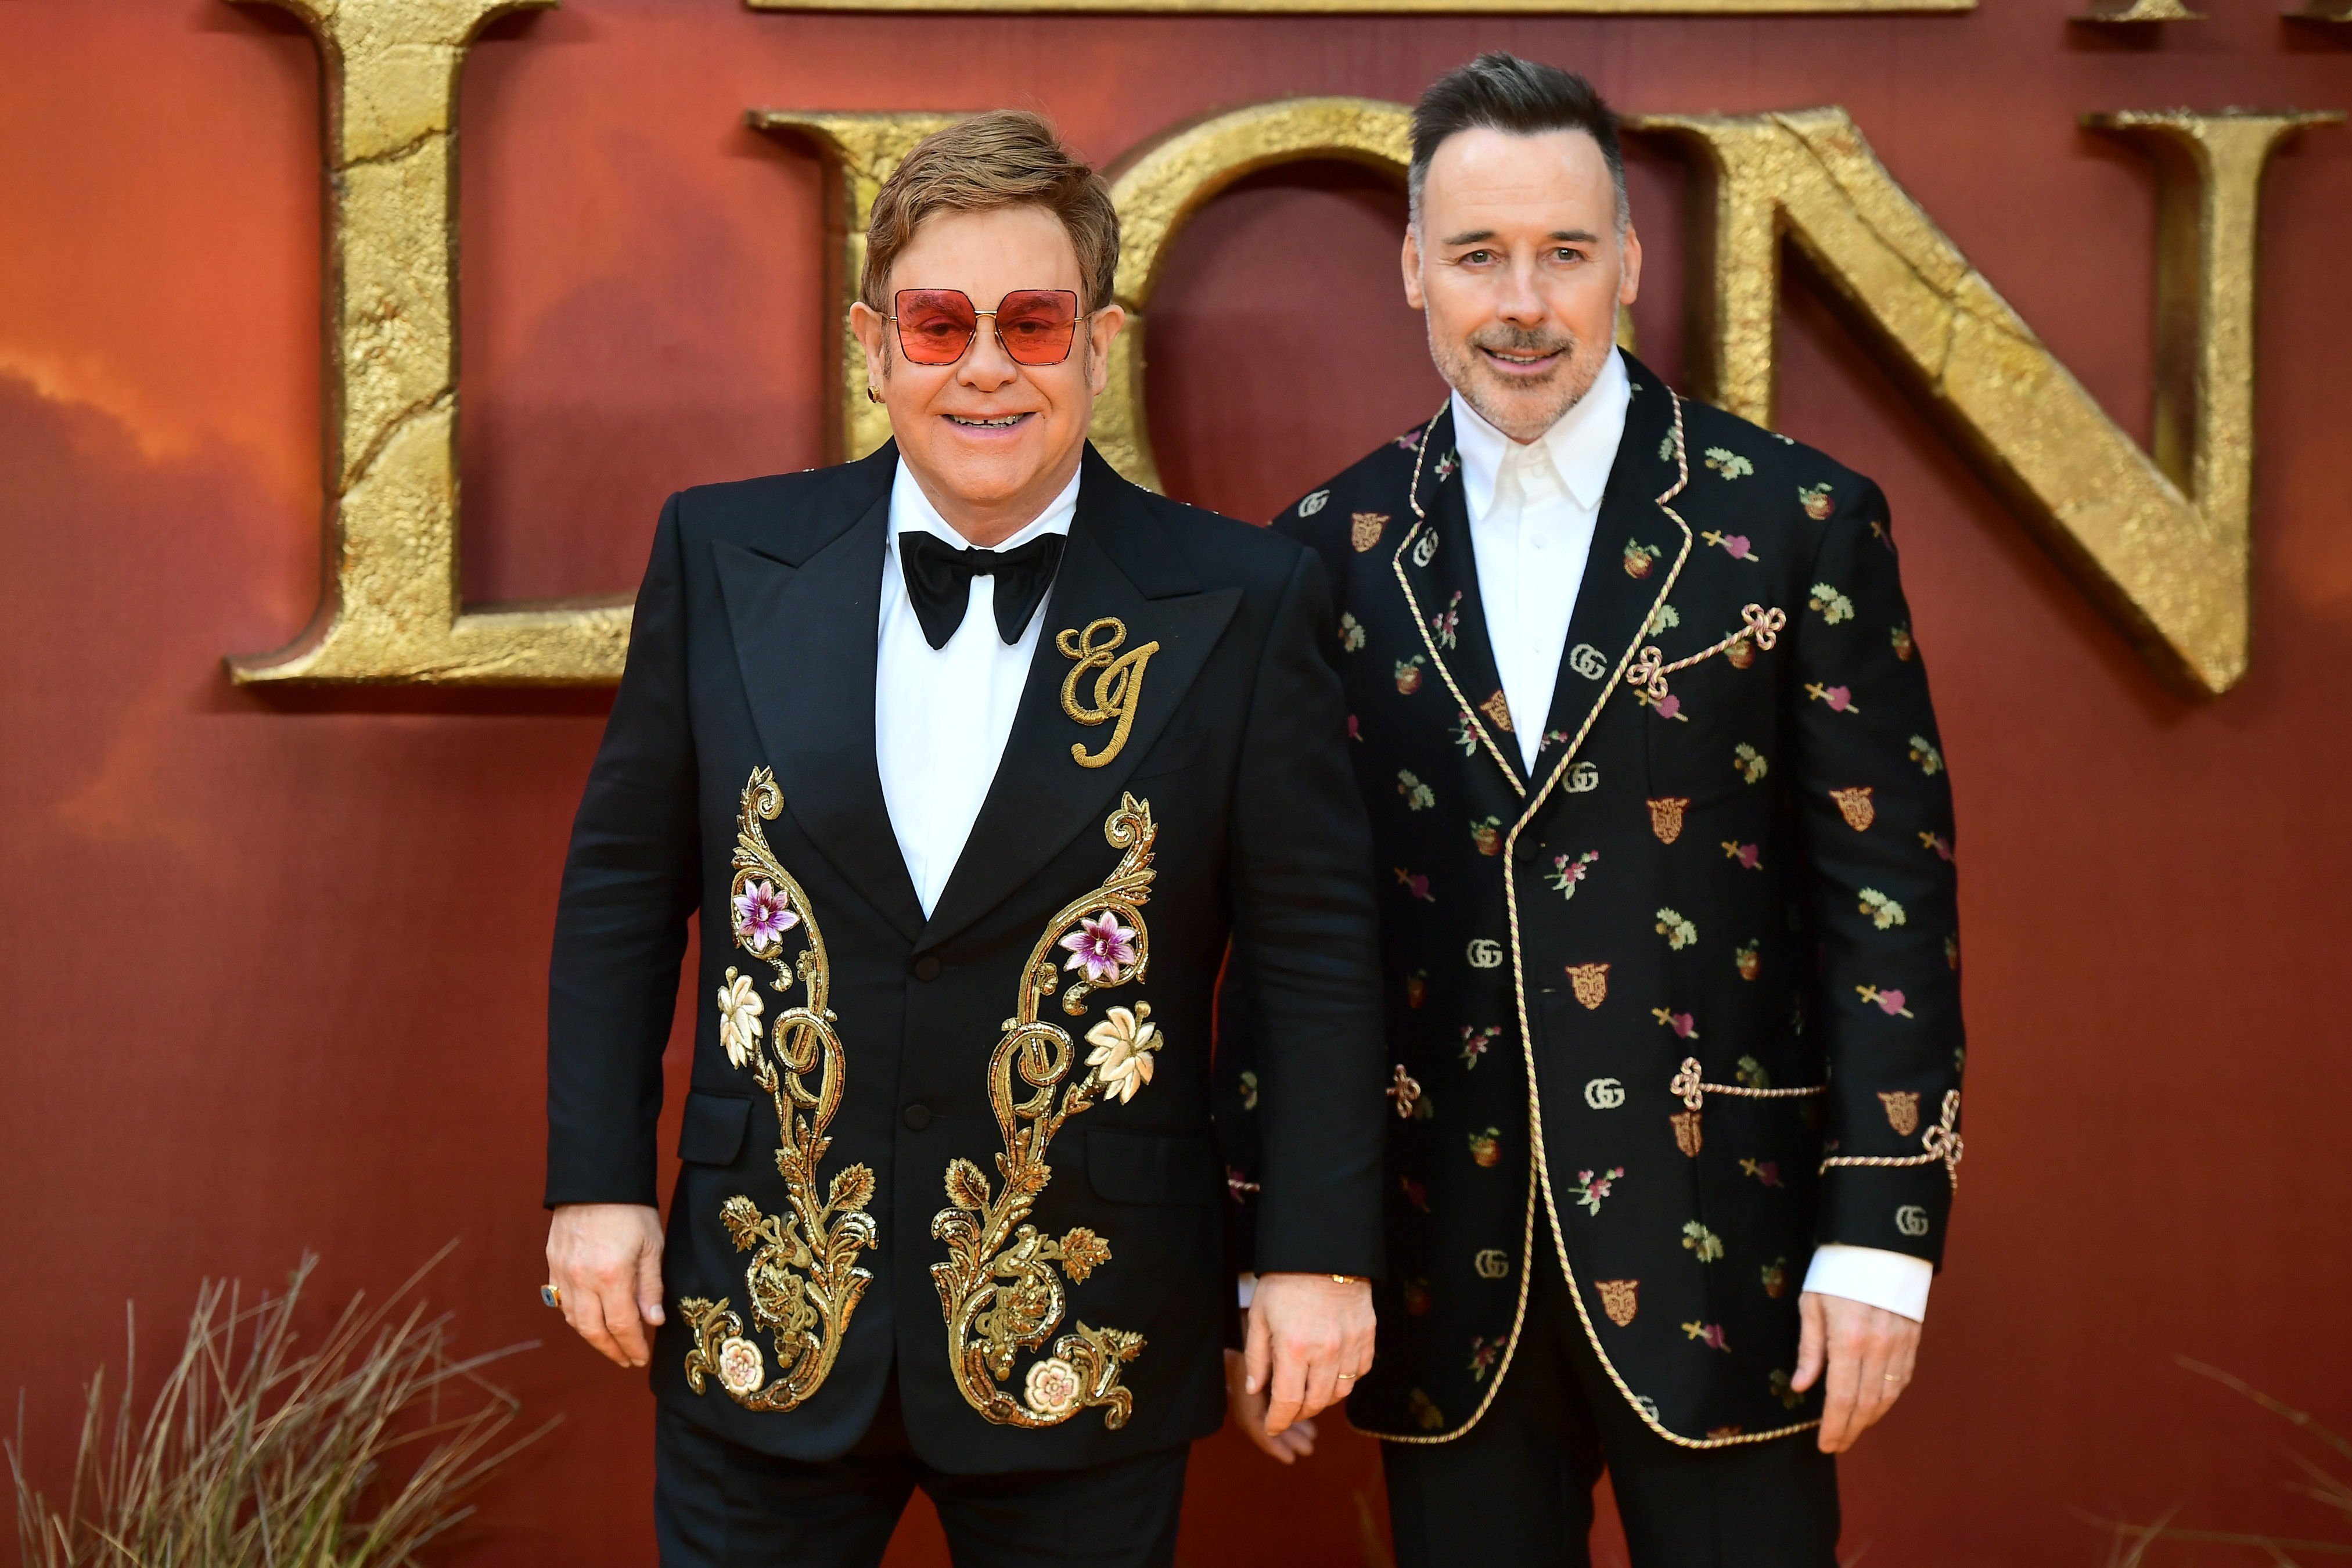 LONDON, ENGLAND - JULY 14: Elton John and David Furnish attend "The Lion King" European Premiere at Leicester Square on July 14, 2019 in London, England. (Photo by Samir Hussein/WireImage) (Foto: WireImage)